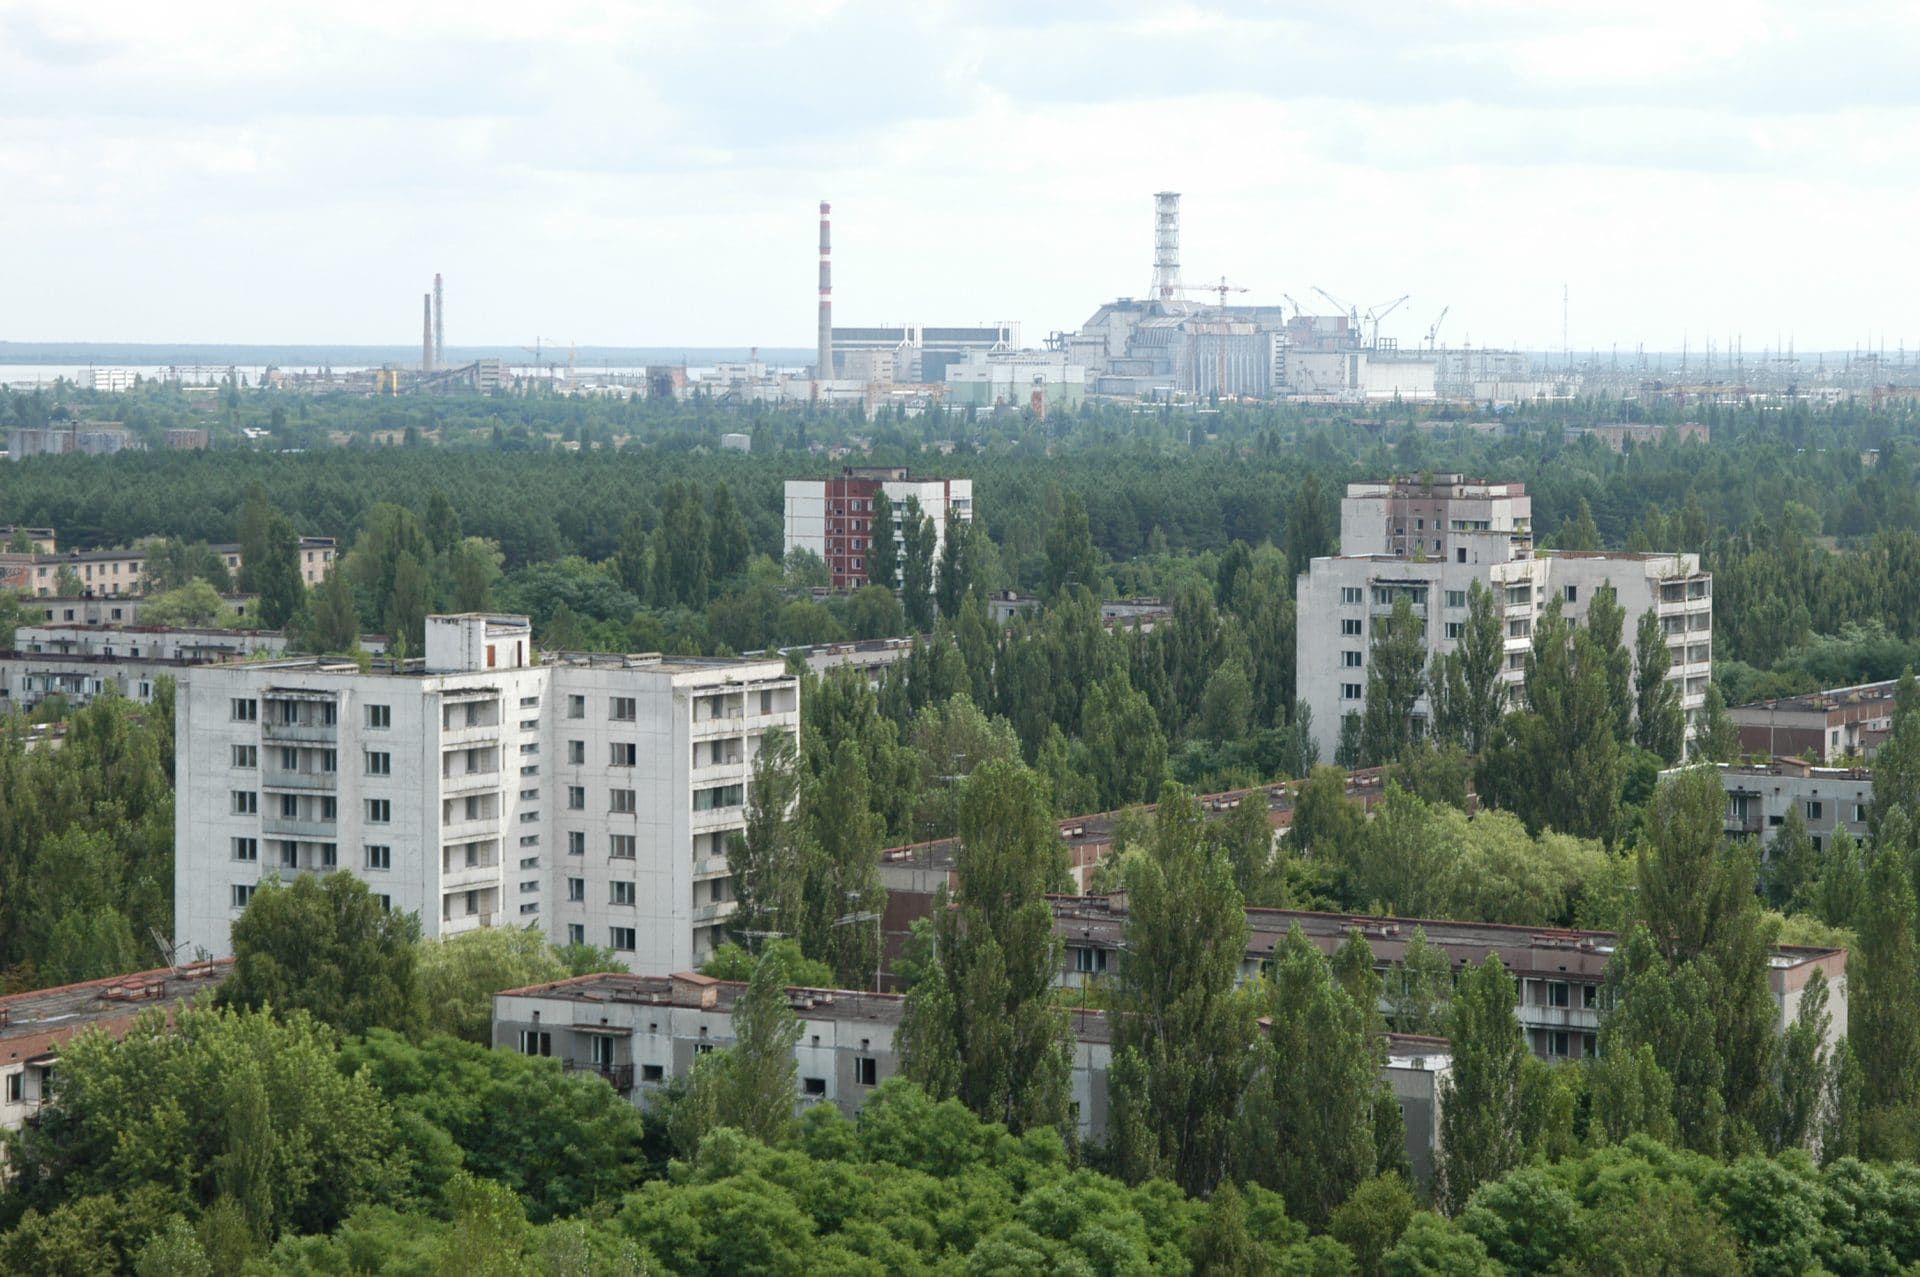 The town of Pripyat, three kilometers from the Chernobyl Nuclear Power Plant, was abandoned after the April 1986 nuclear disaster.